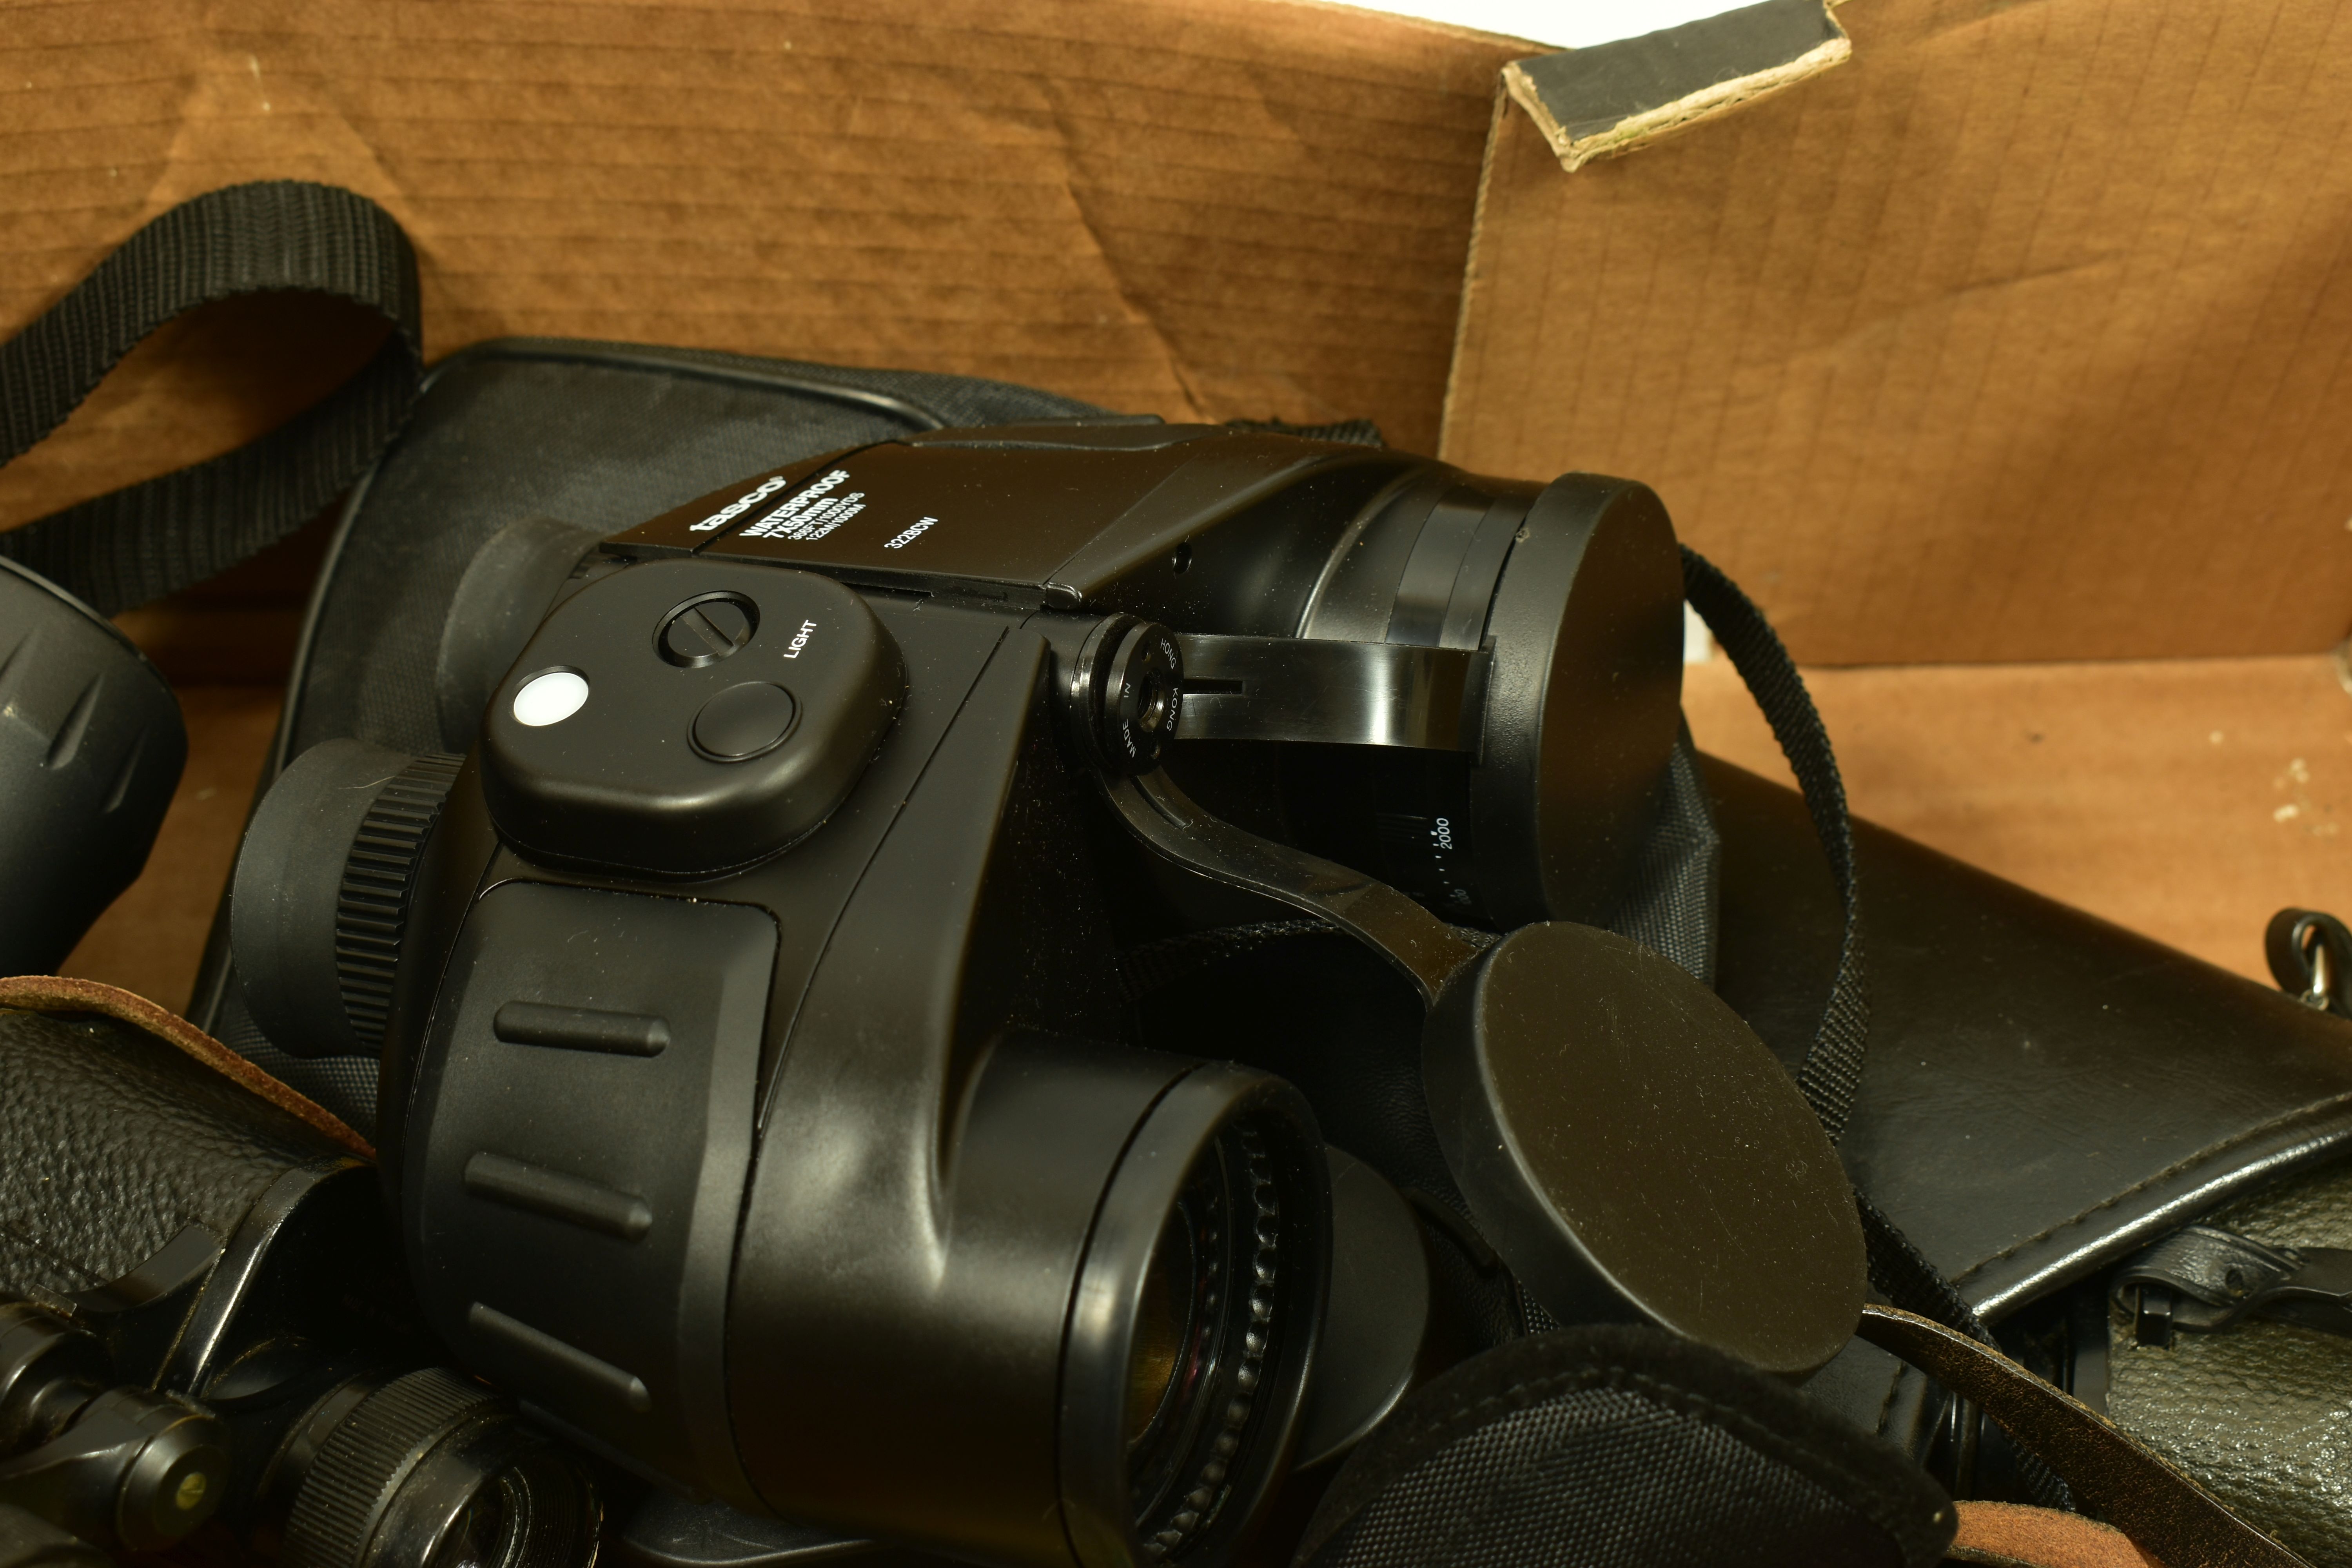 A TRAY CONTAINING BINOCULARS comprising of a pair of Nikon Action AX 10-22x50 in case, a pair of - Image 5 of 6